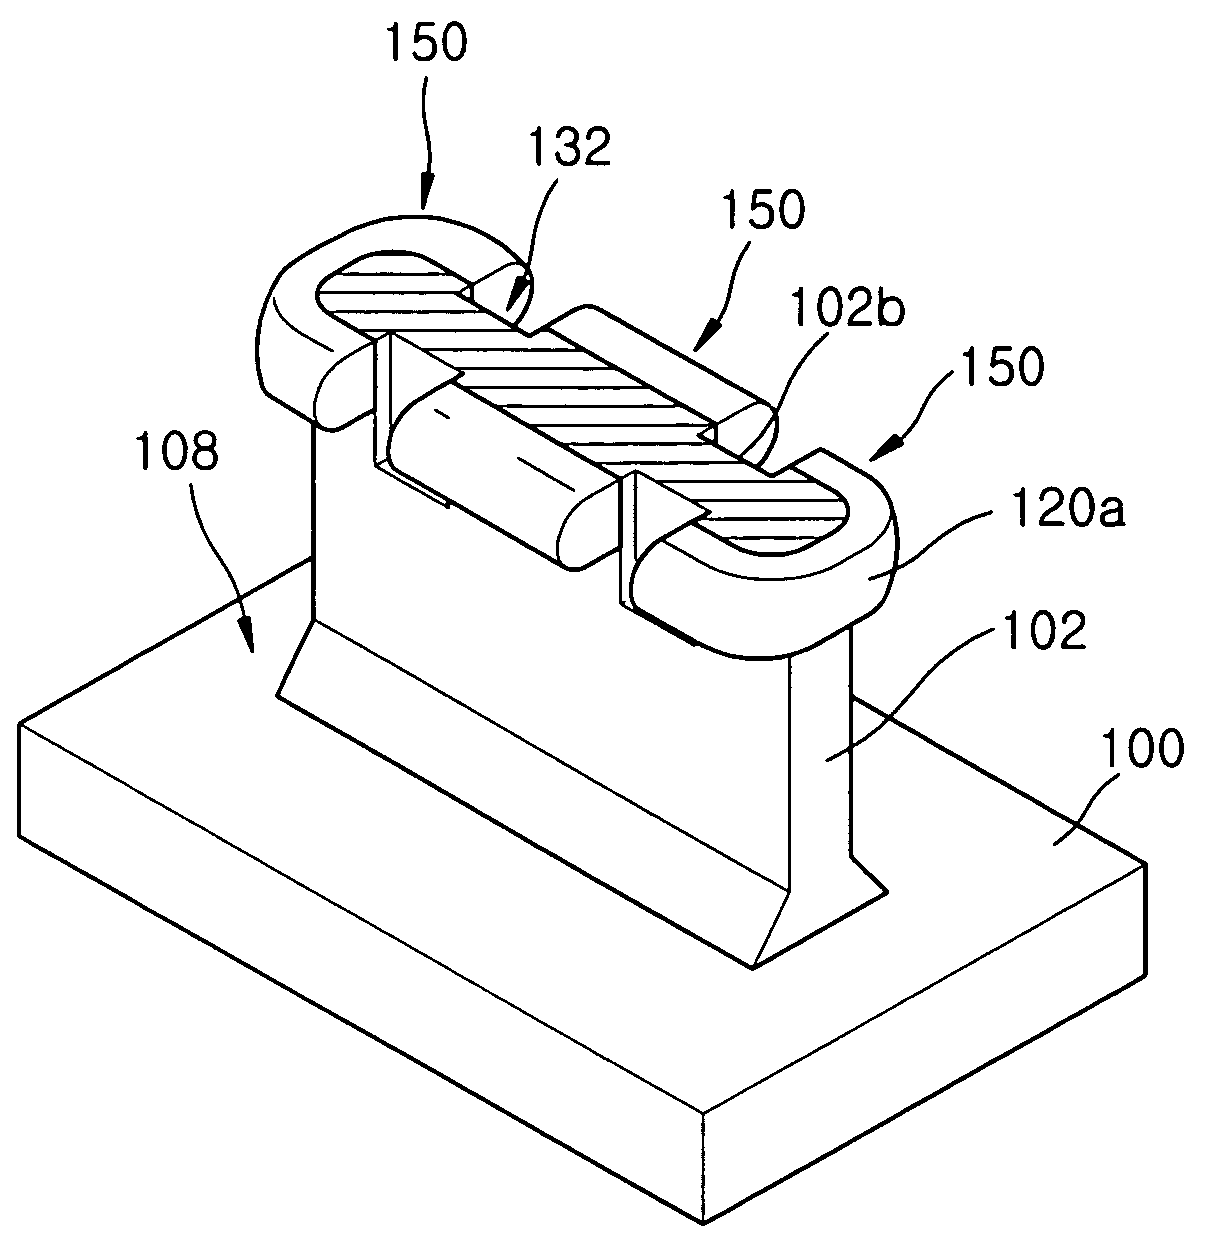 Semiconductor device having a junction extended by a selective epitaxial growth (SEG) layer and method of fabricating the same